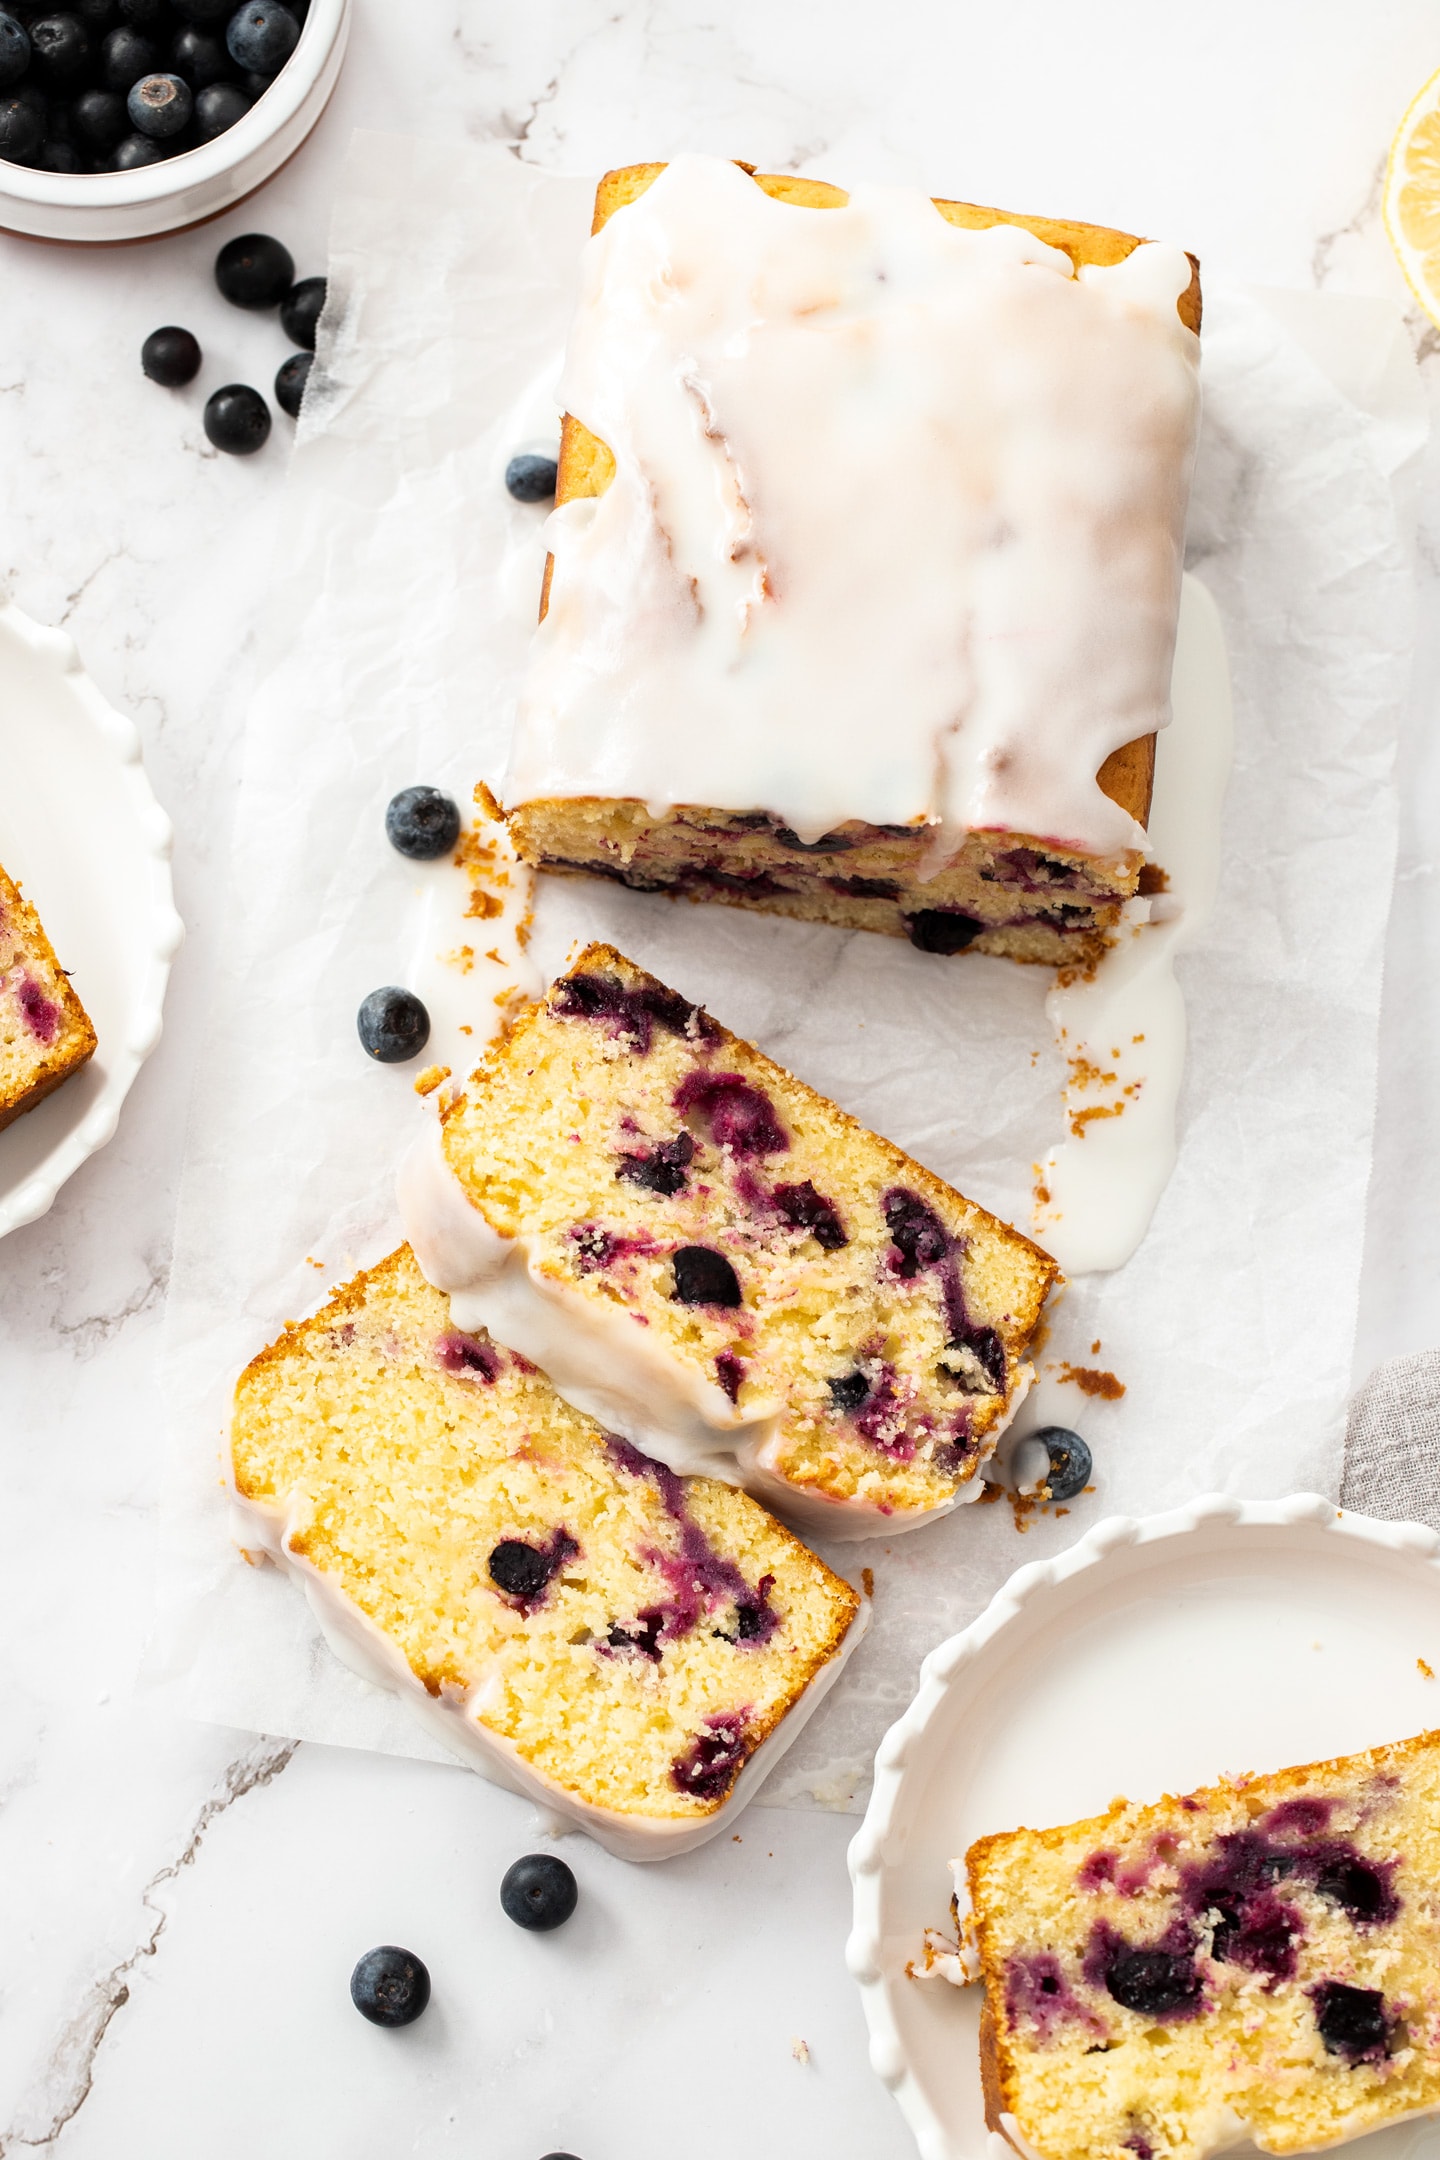 Top down view of a blueberry lemon loaf cake with two slices cut in front of it.